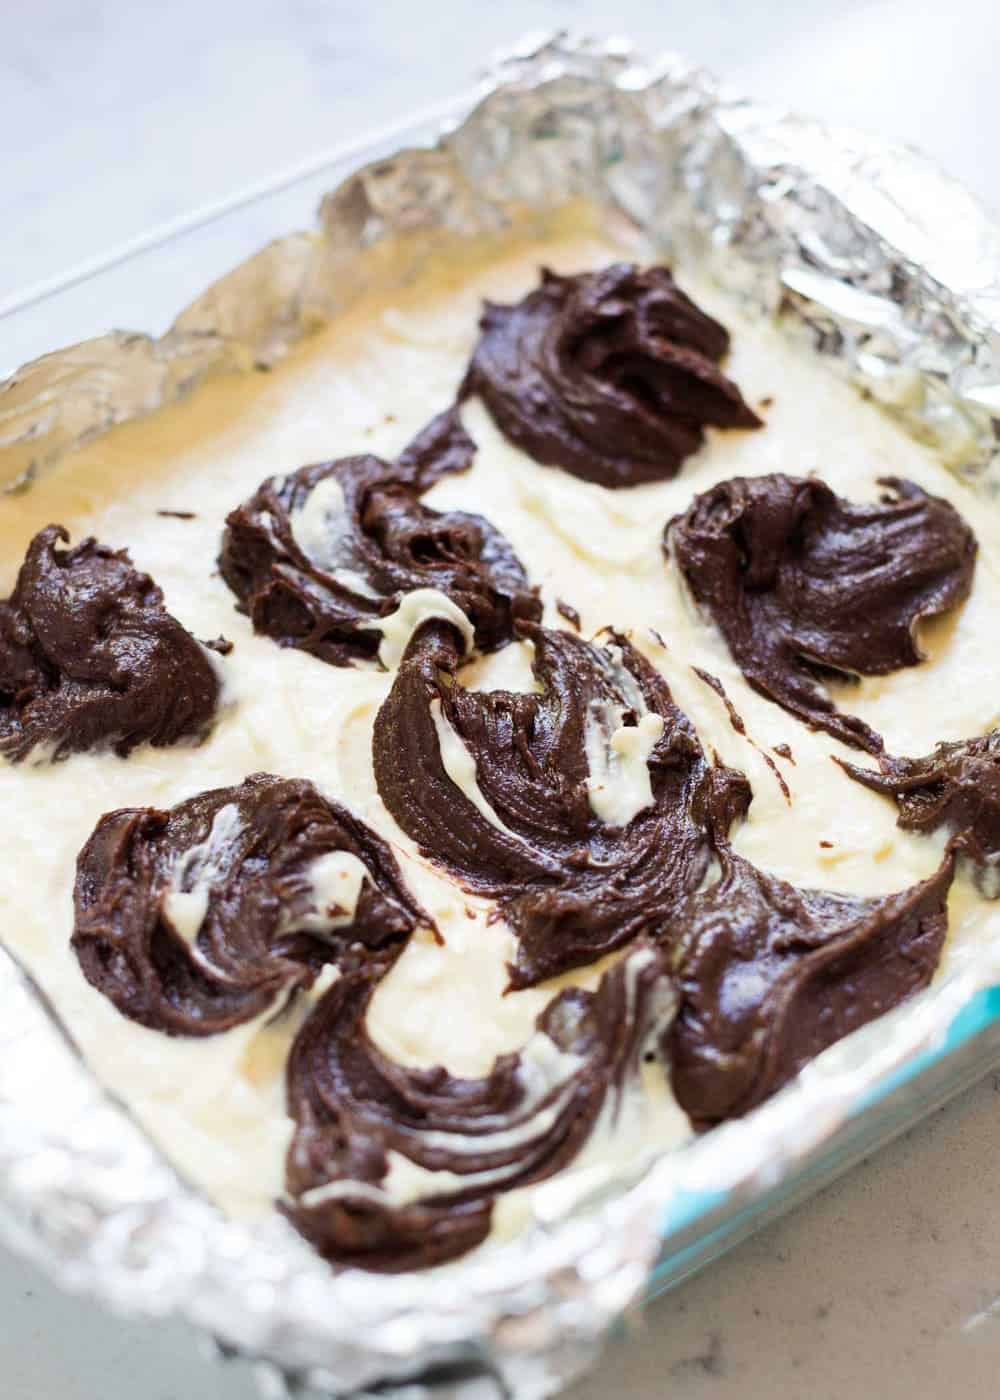 Swirling the cheesecake brownie layers together.